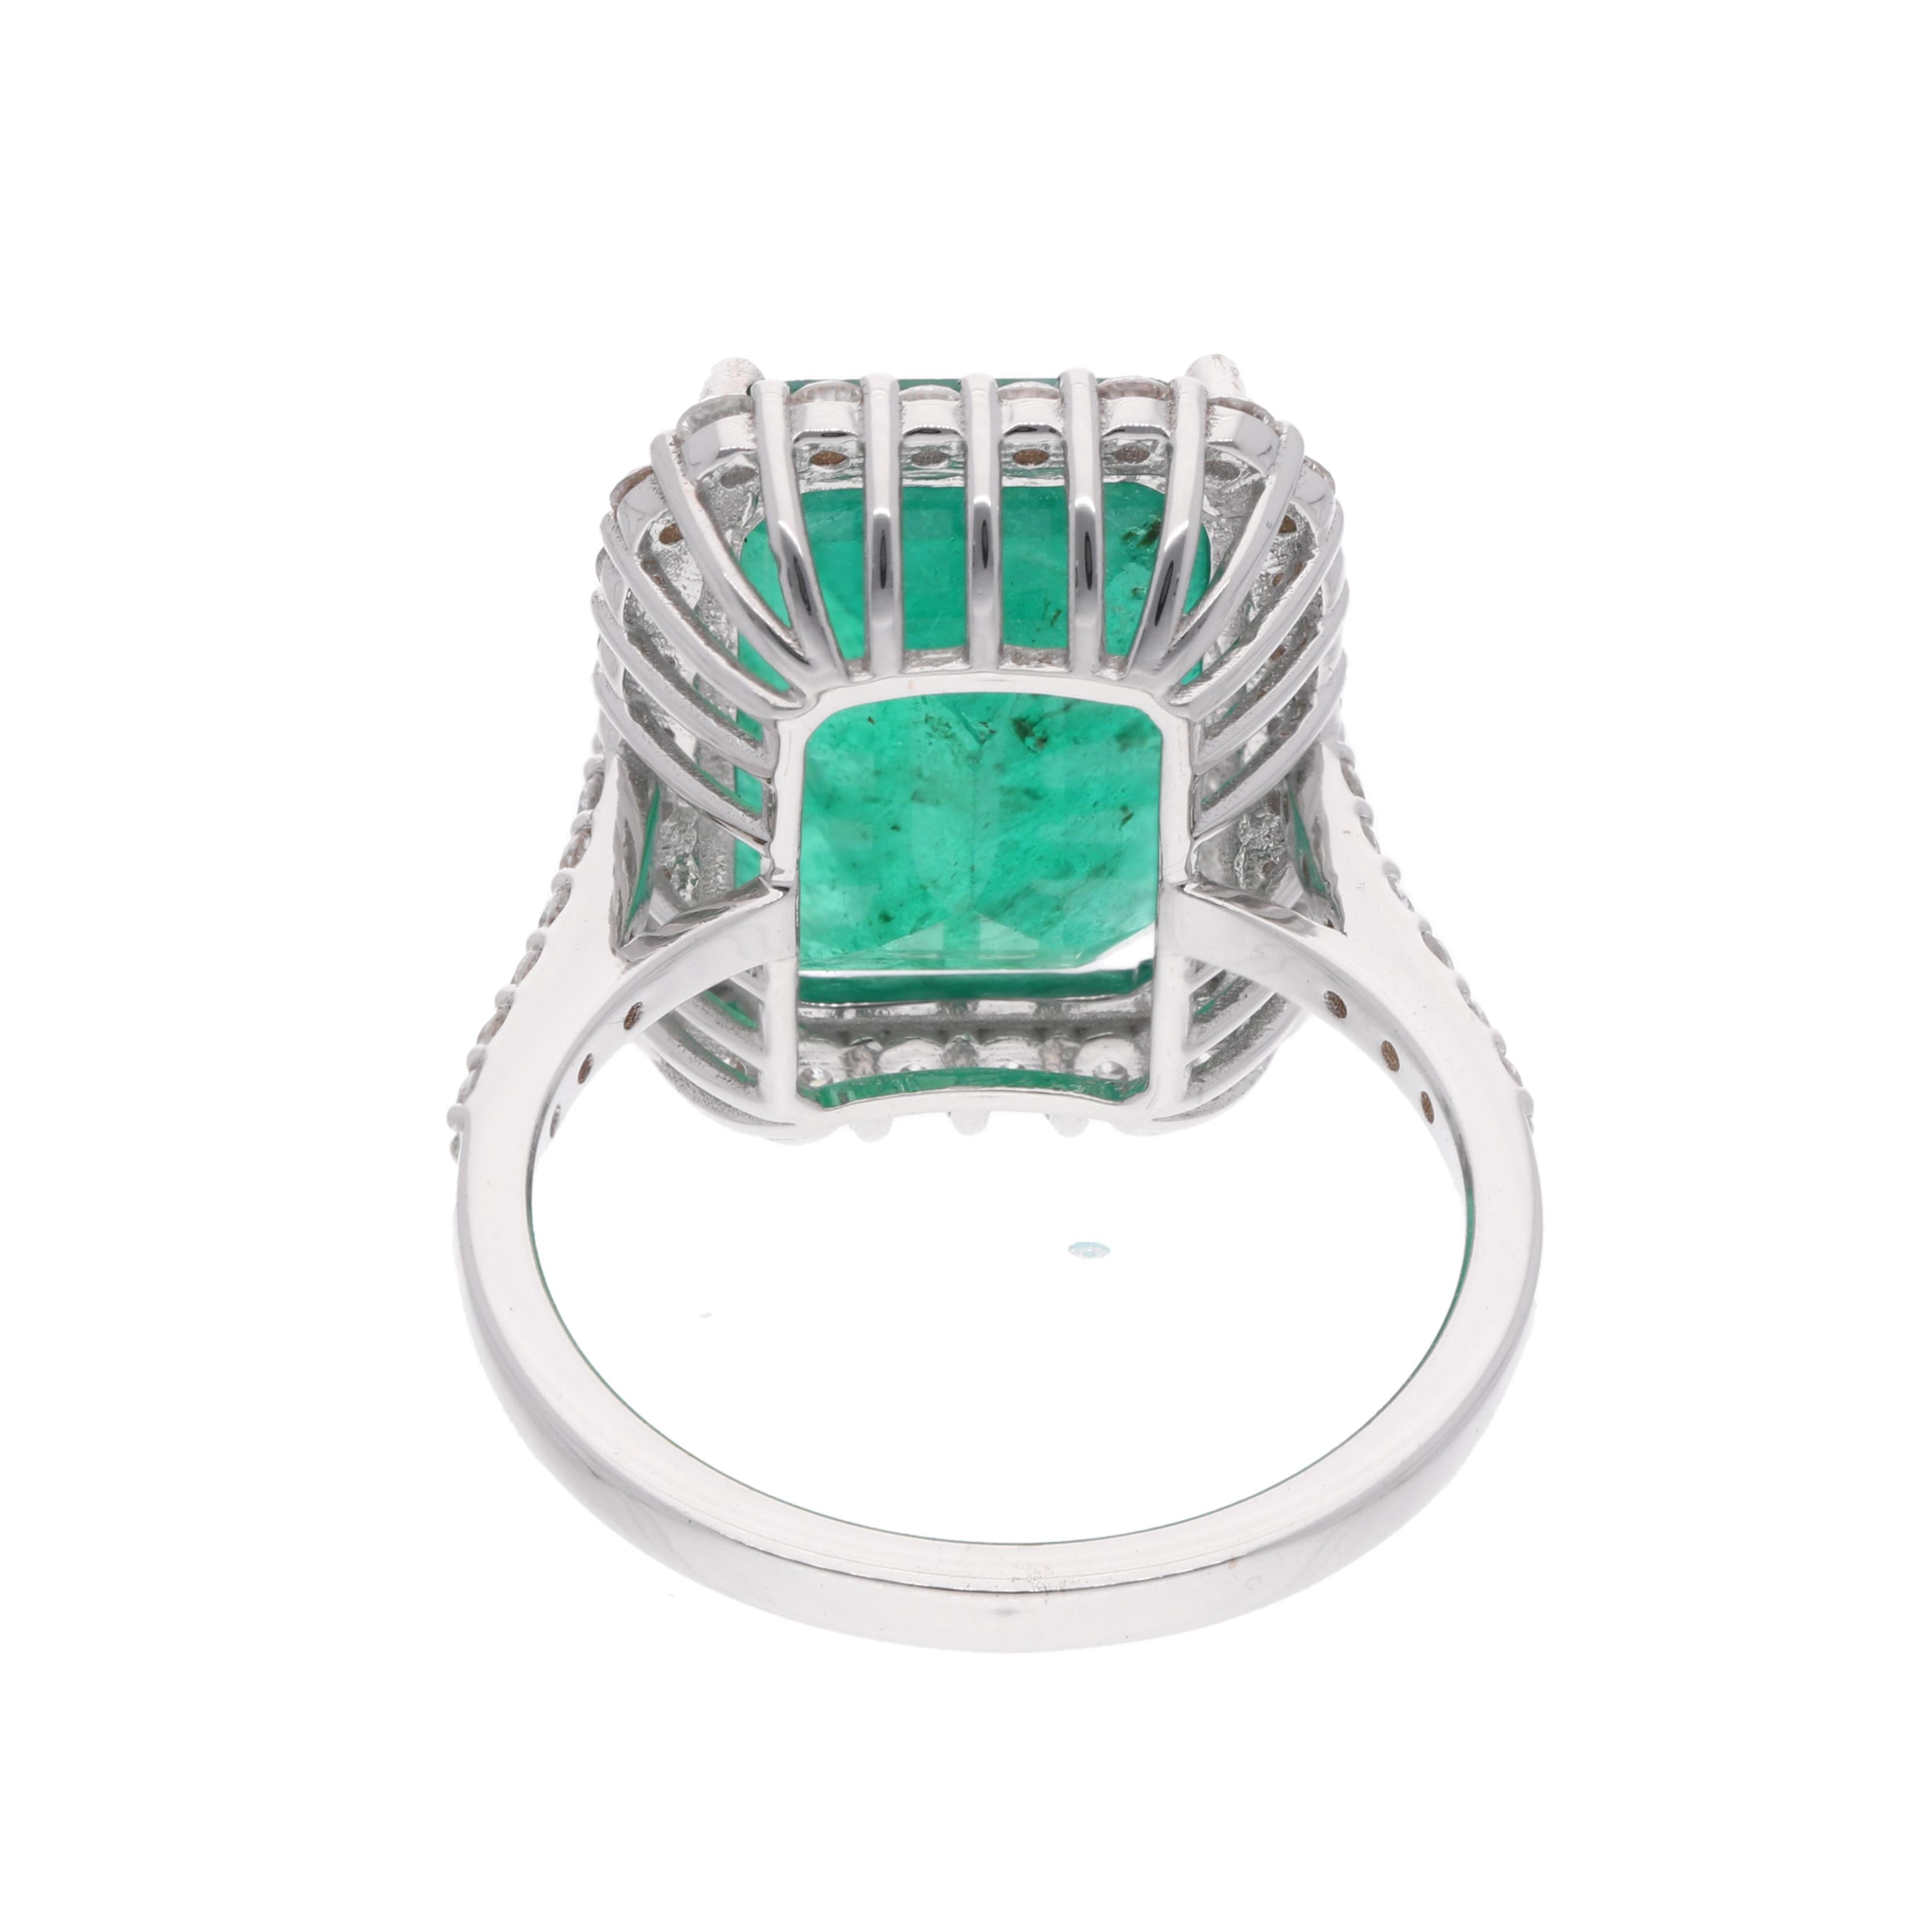 Handcrafted with care and precision, this ring features a stunning 10.53 ct. Emerald Cut Zambian Emerald at its center, surrounded by halo of sparkling diamonds. This ring is available in 18k Rose Gold/White Gold/Yellow Gold.

This is a perfect Gift